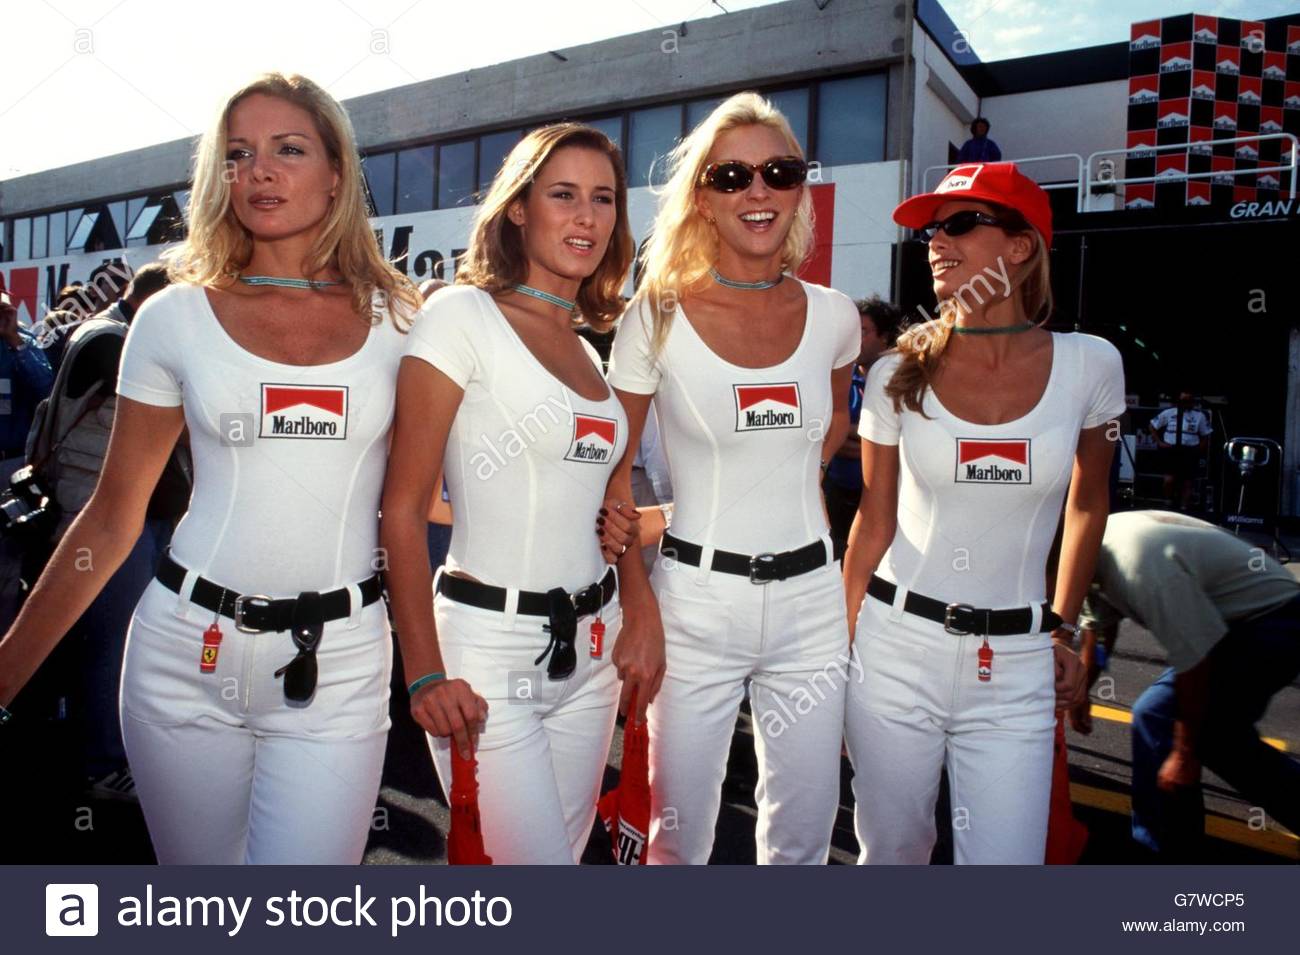 Marlboro girls at the practice for the Argentinean Grand Prix on 11 April 1997.